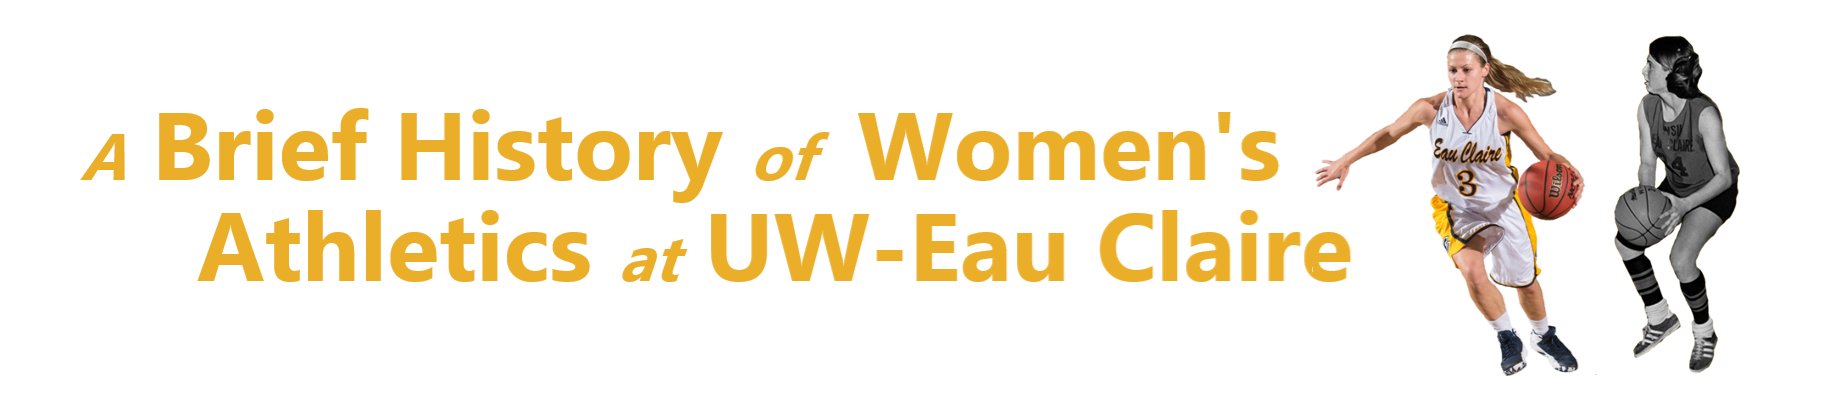 A Brief History of Women's Athletics at UWEC